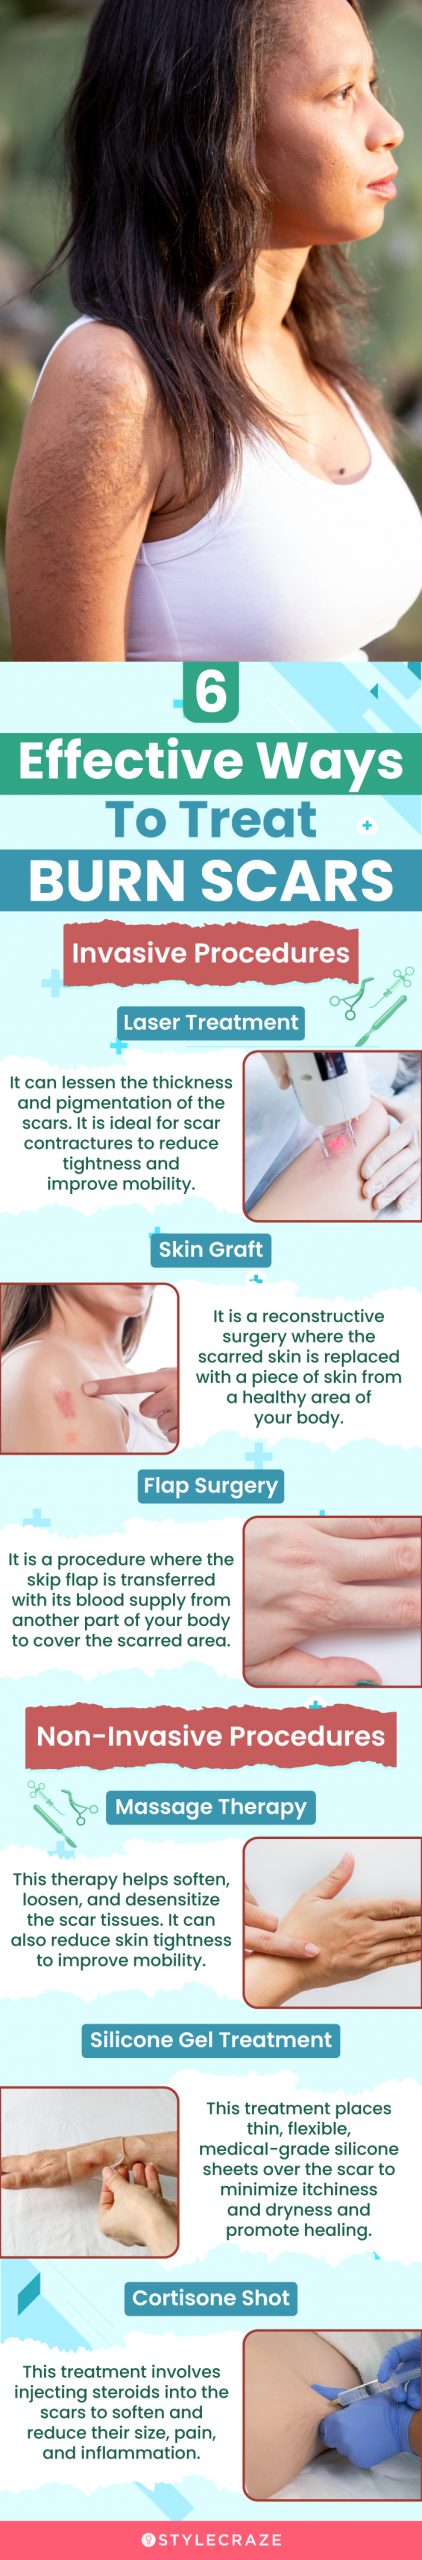 6 effective ways to treat burn scars (infographic)